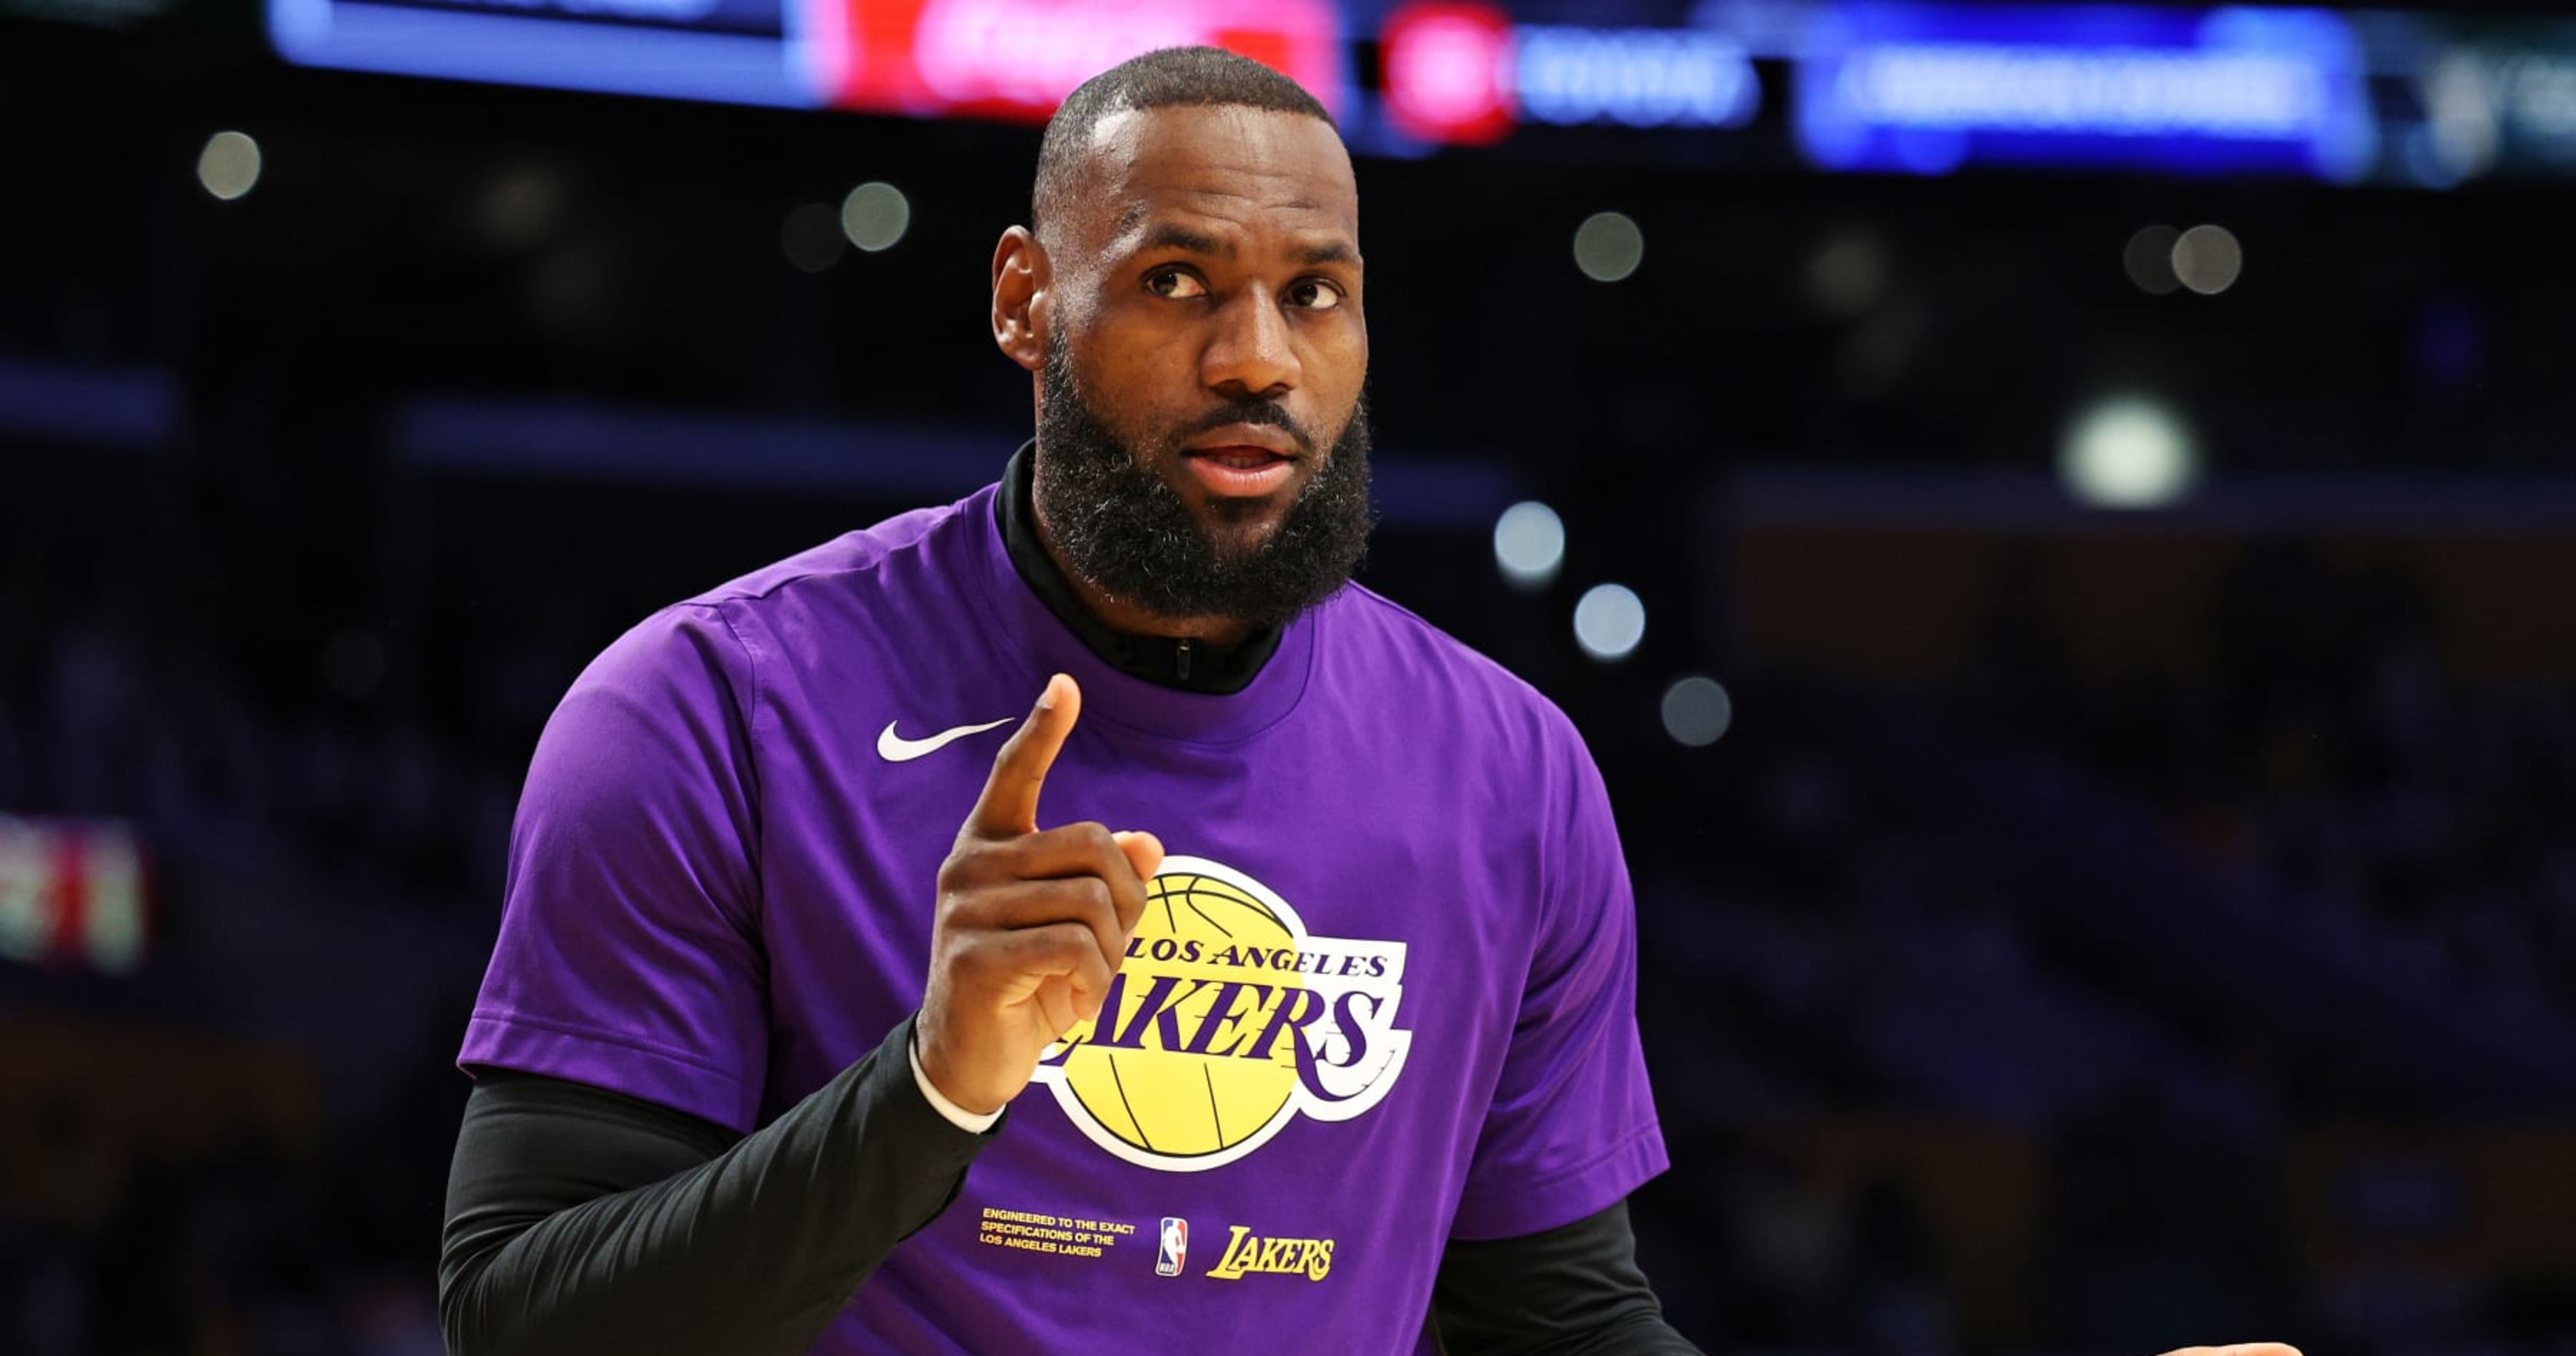 LeBron interested in joining Team USA at 2024 Paris Games, media report